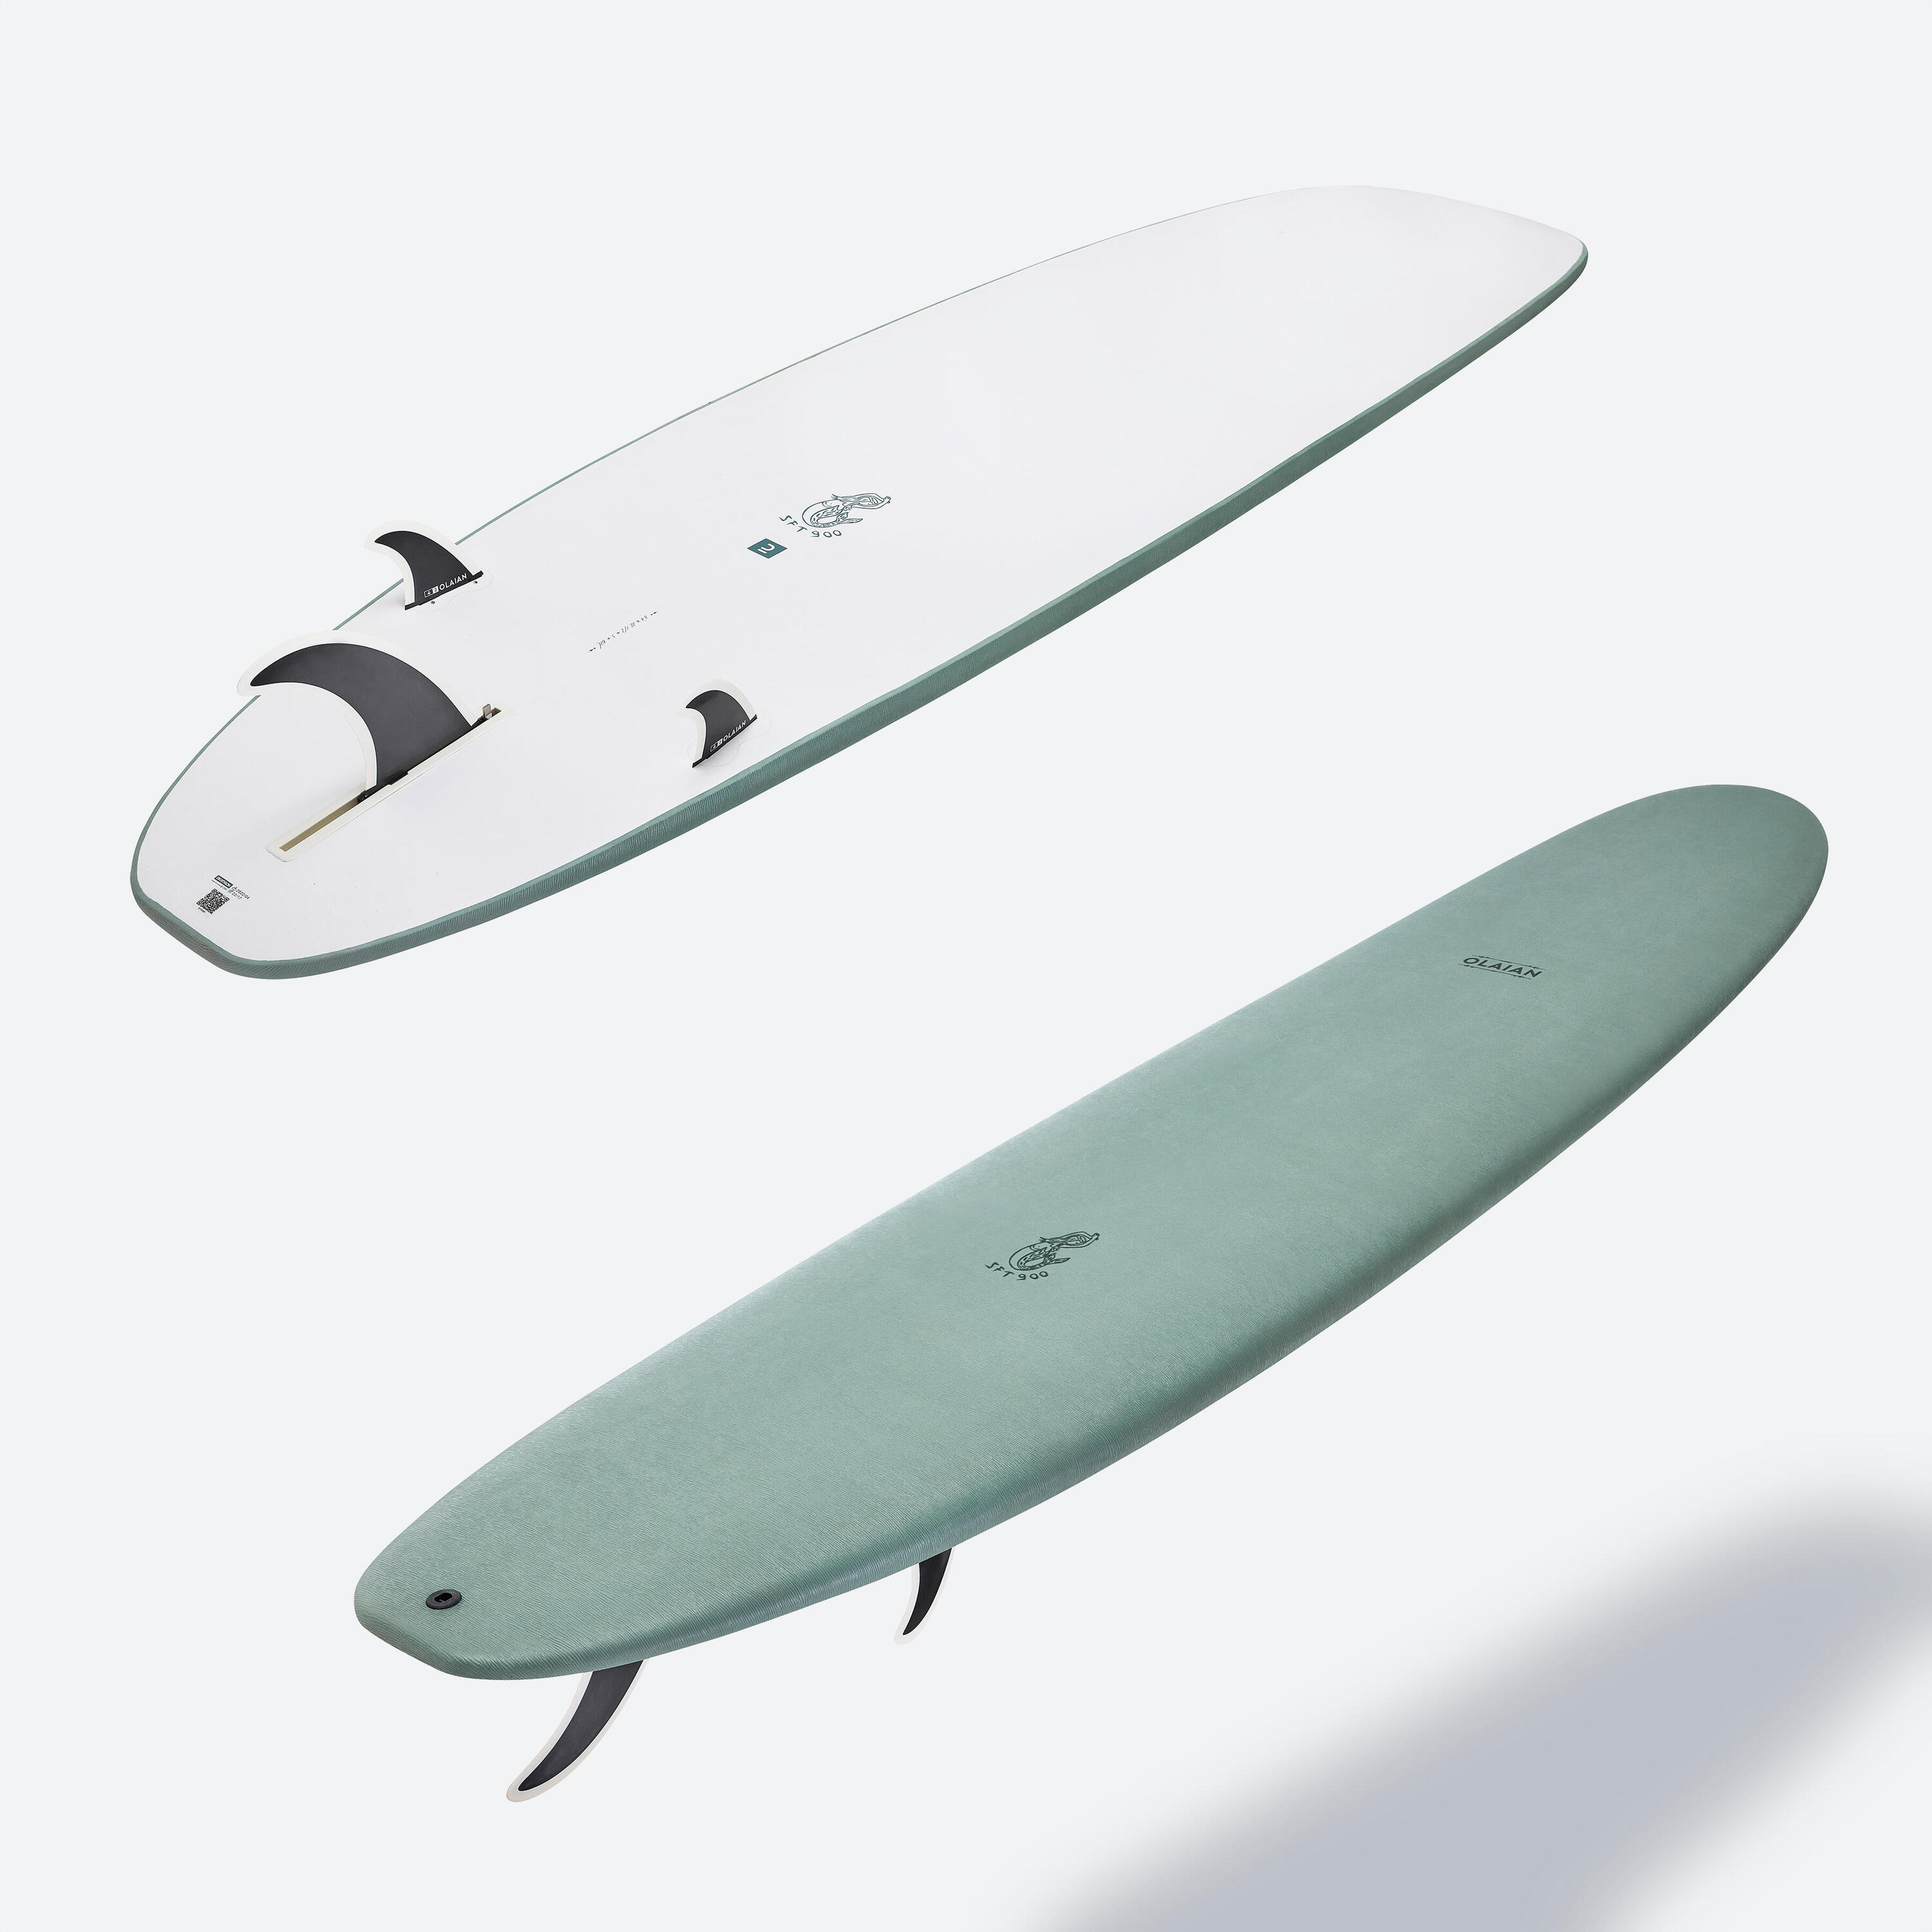 SURFBOARD 900 EPOXY SOFT 8'4 with 3 fins. 3/14